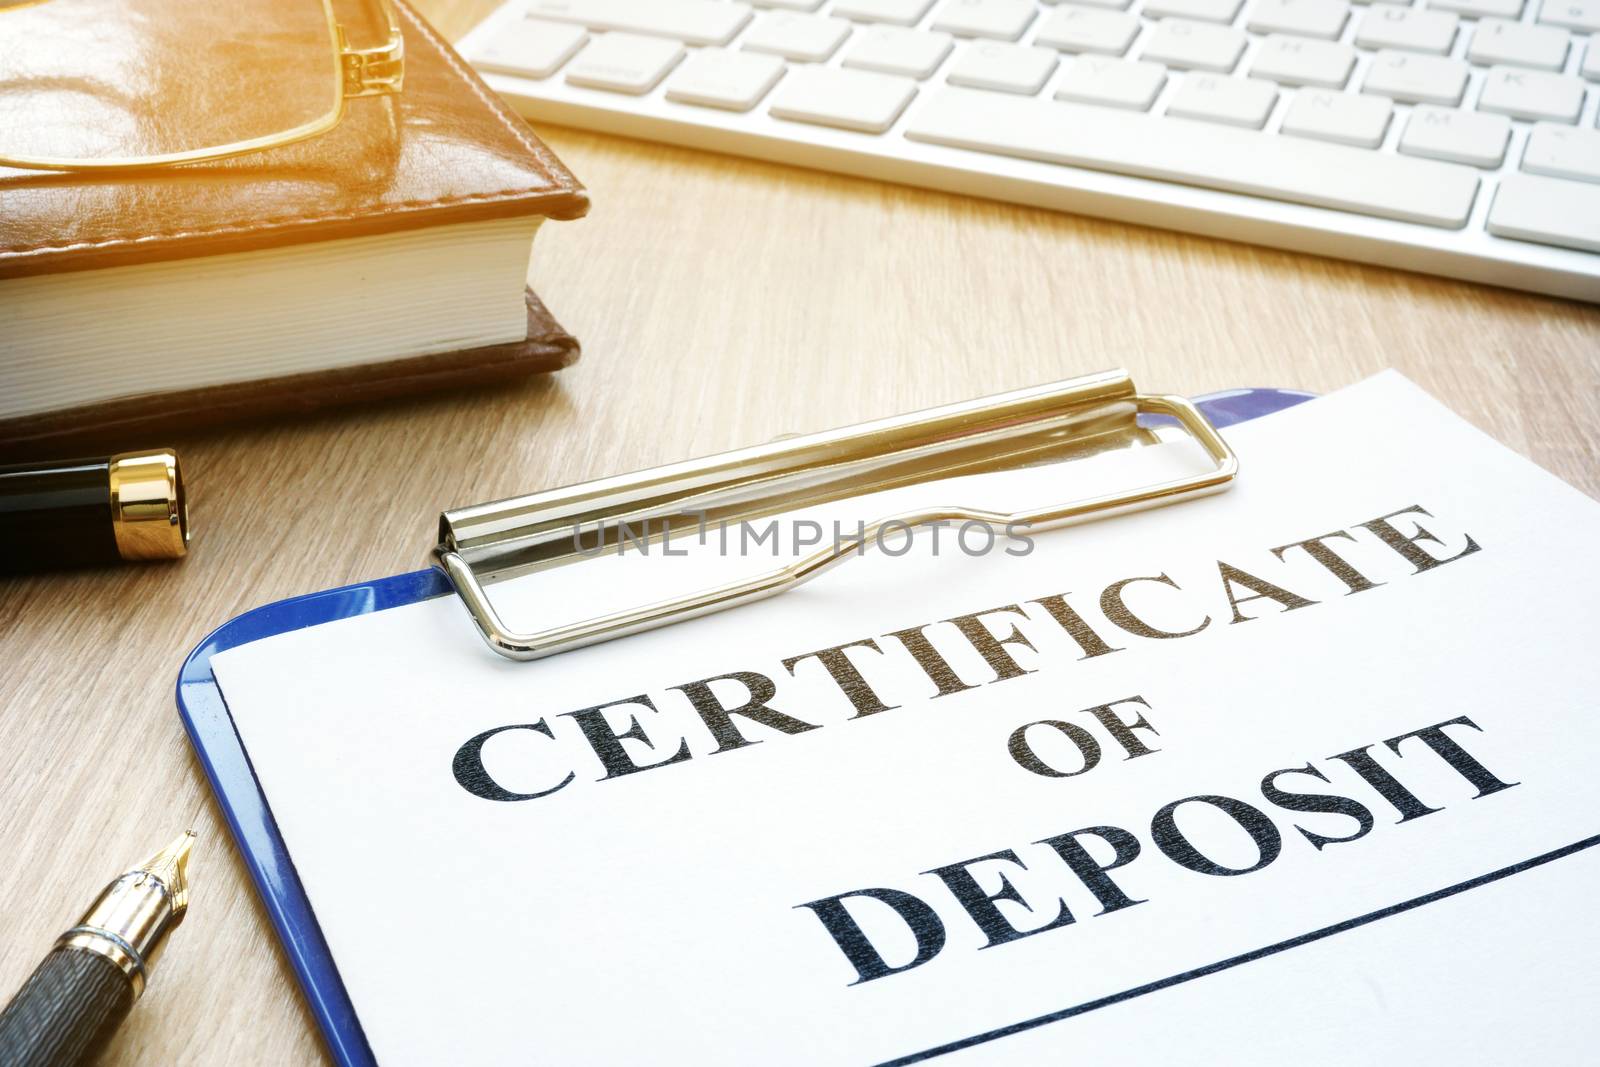 Certificate of deposit and pen on a desk.